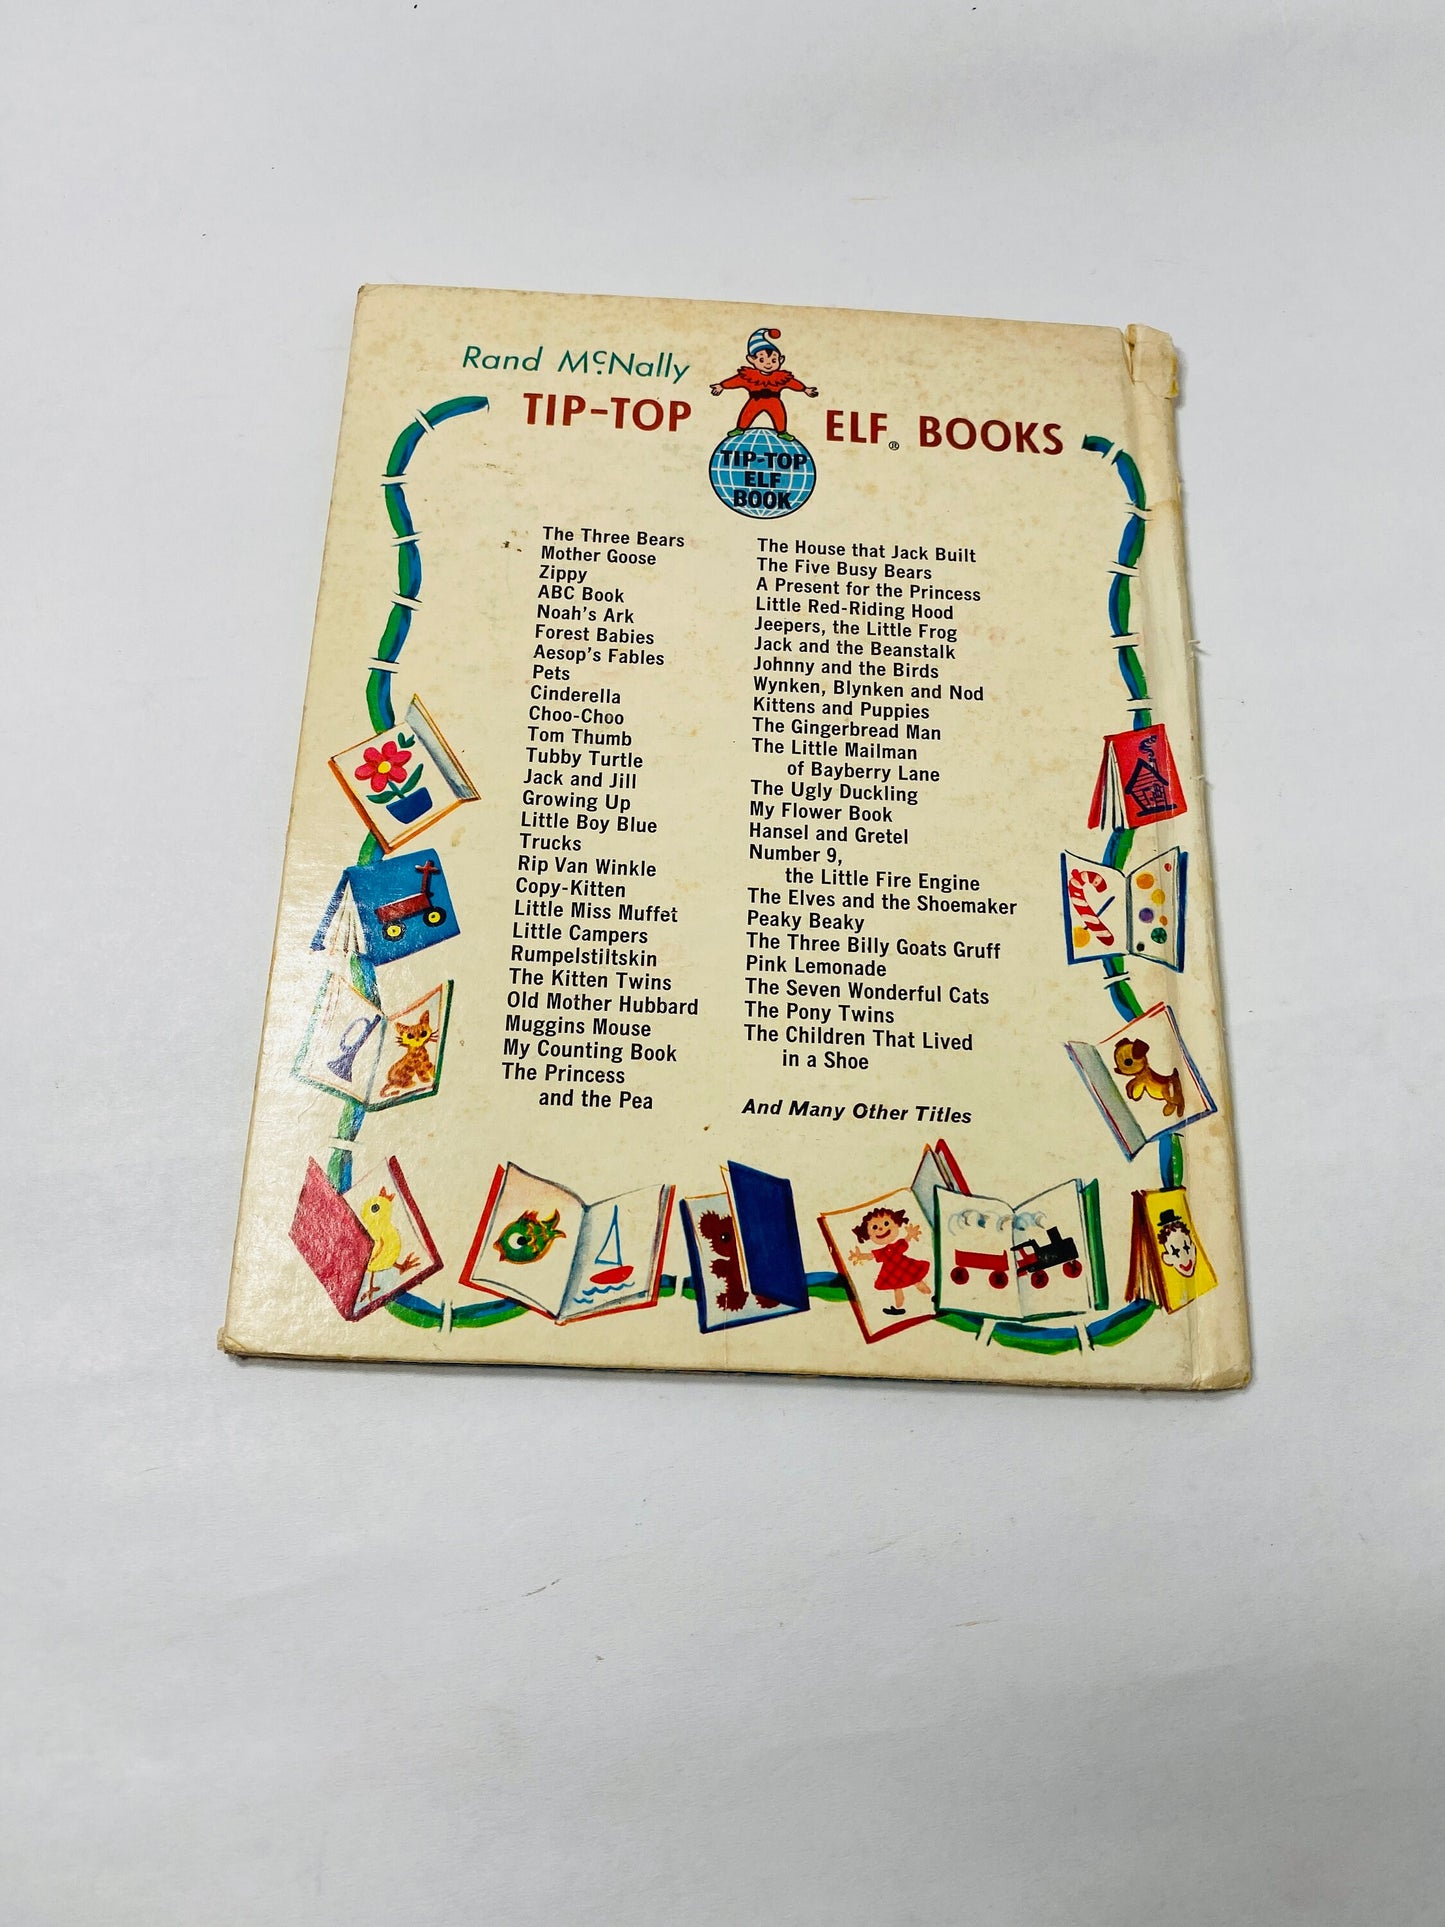 1959 Funny Hat vintage Rand McNally Top Top Junior Elf children's book about a girl and her accessories by Marjorie Barrows illustrated